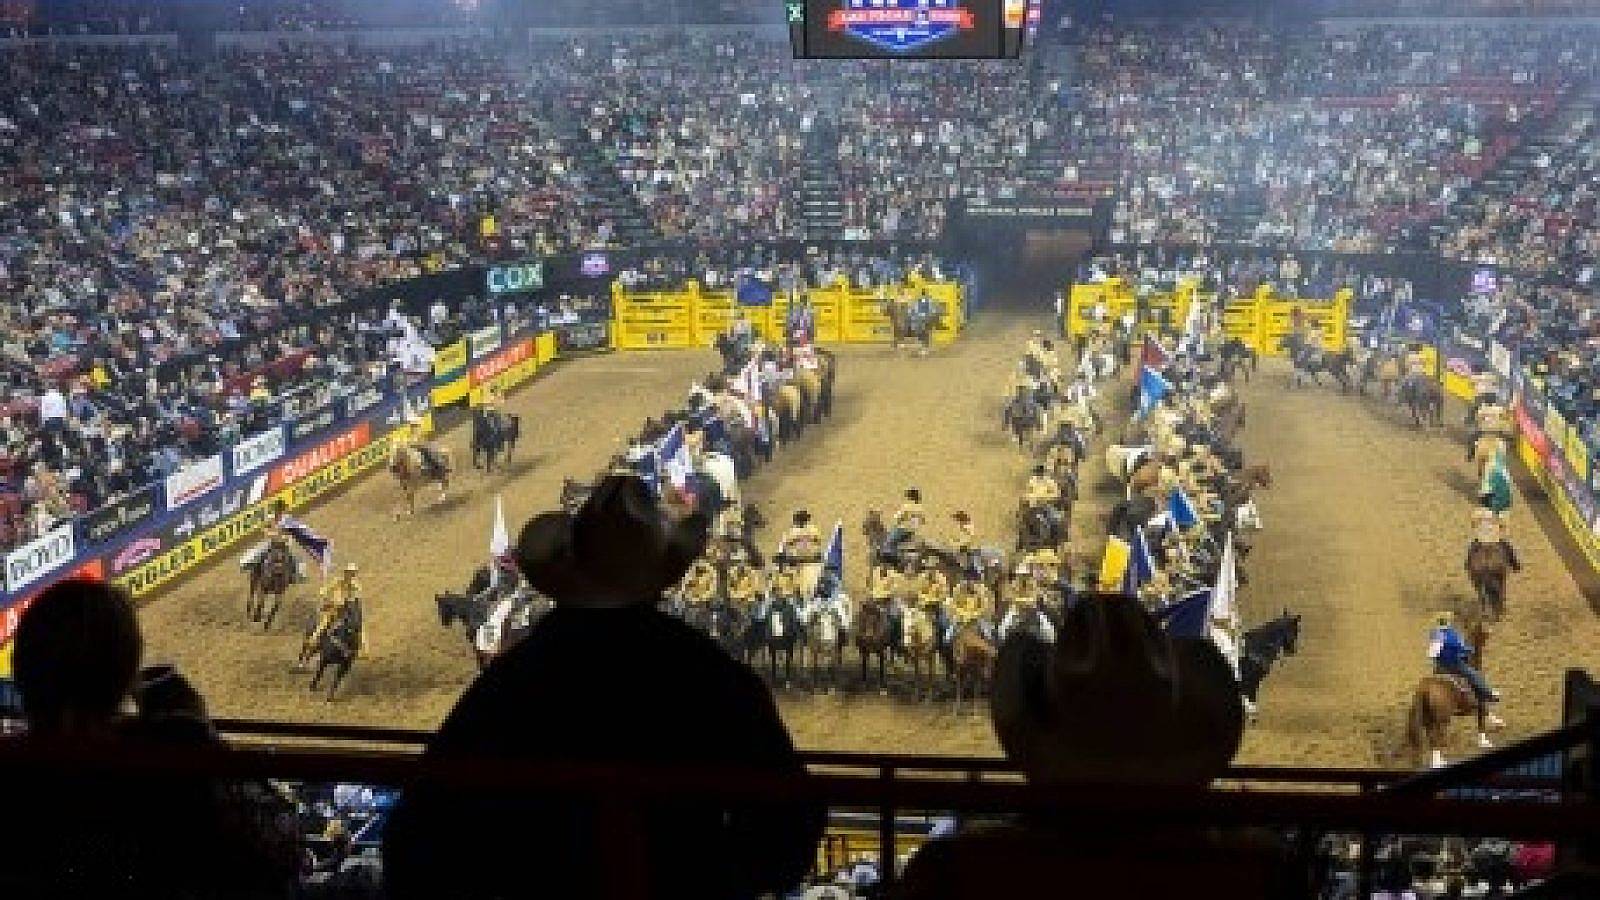 NFR underway after shooting delayed first performance